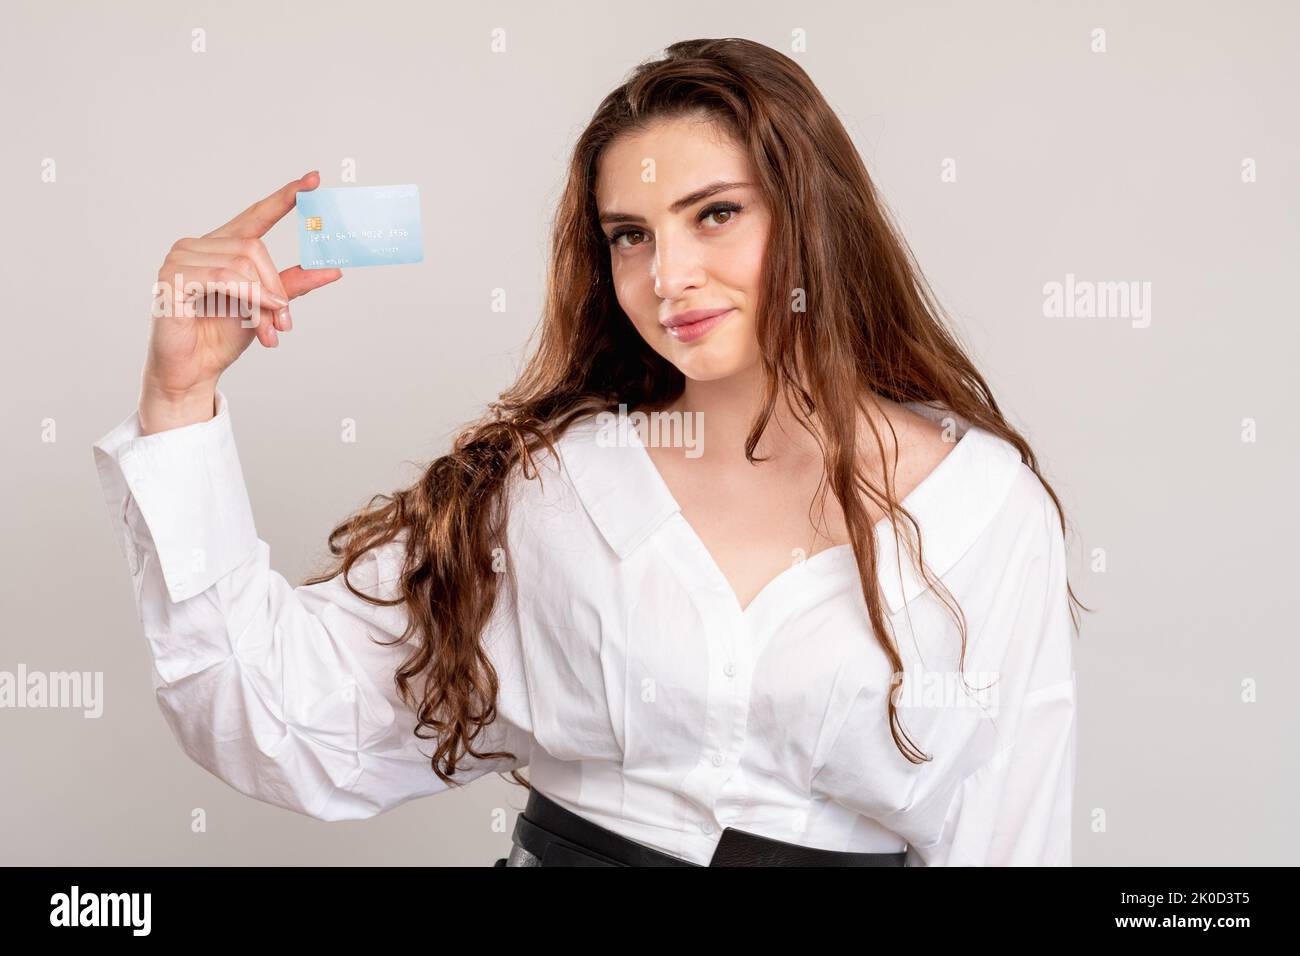 cashless payment banking service woman credit card Stock Photo